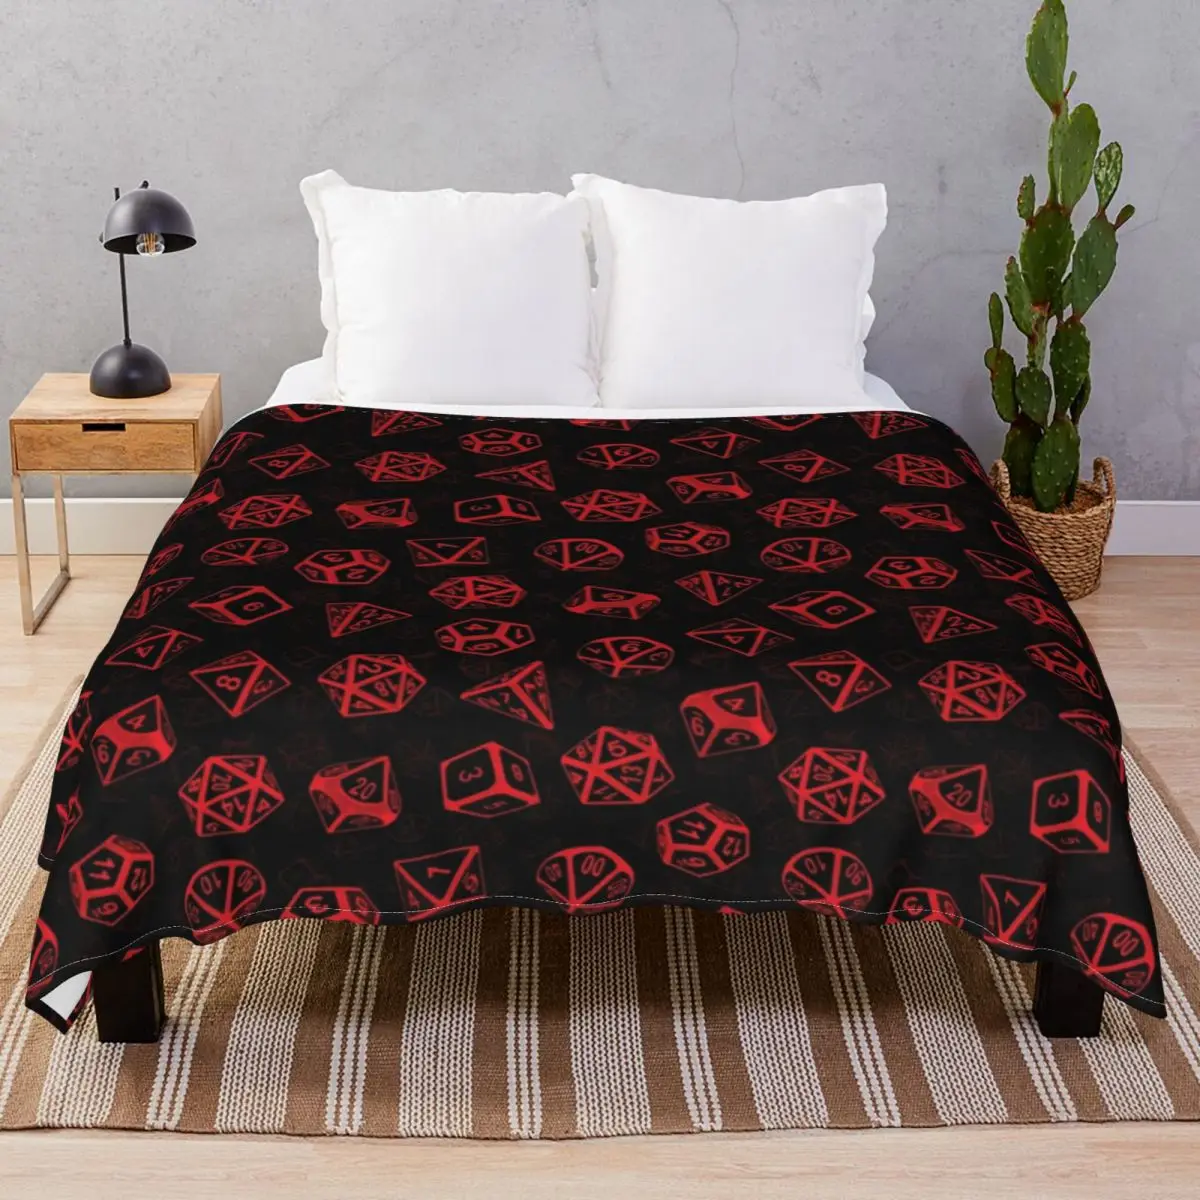 

D20 Dice Set Pattern Red Blankets Fleece Textile Decor Warm Throw Blanket for Bedding Home Couch Camp Cinema